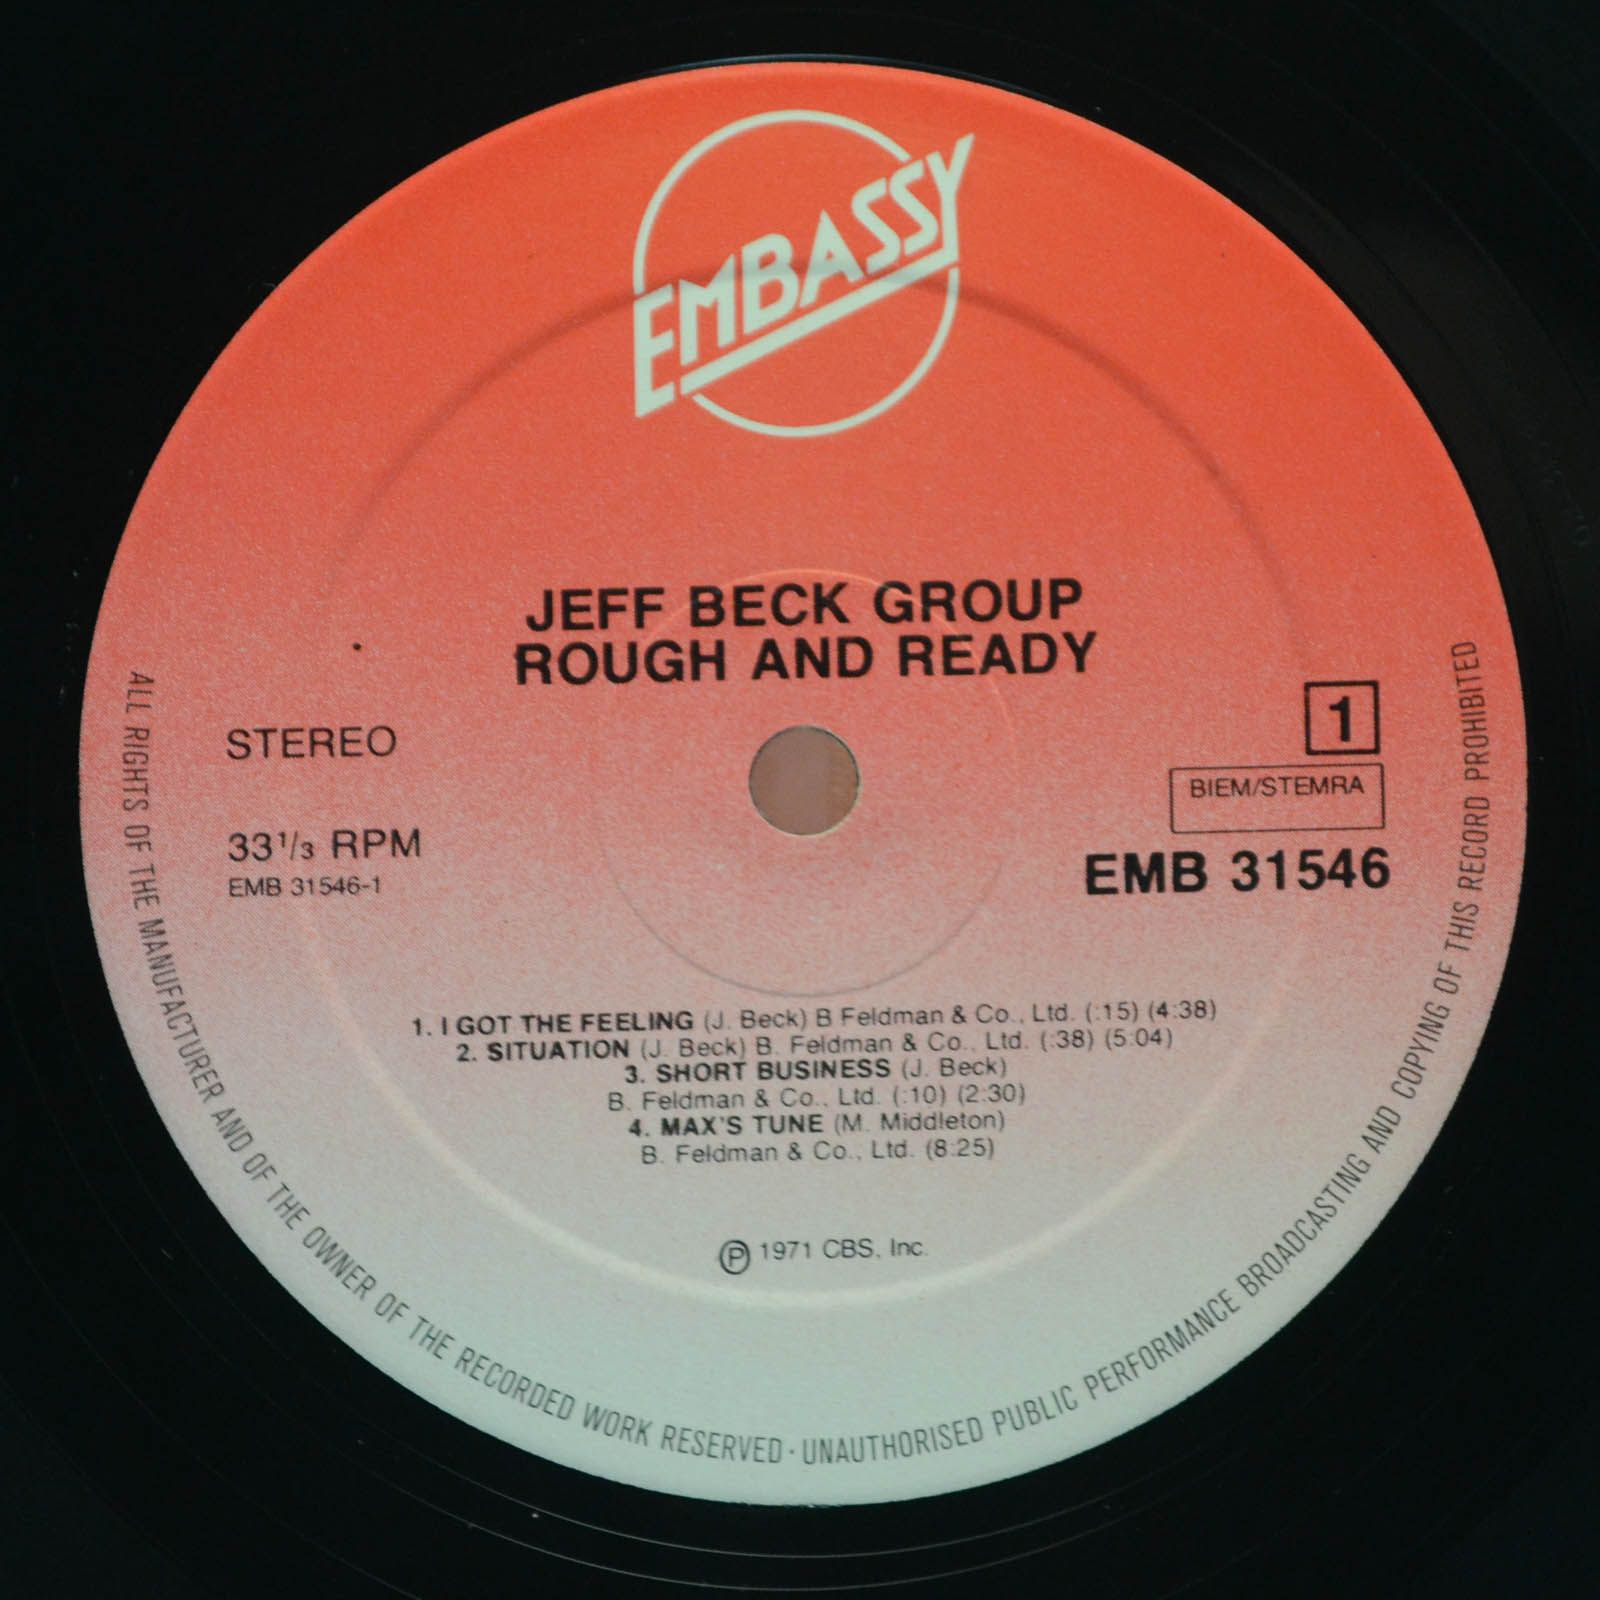 Jeff Beck Group — Rough And Ready, 1971